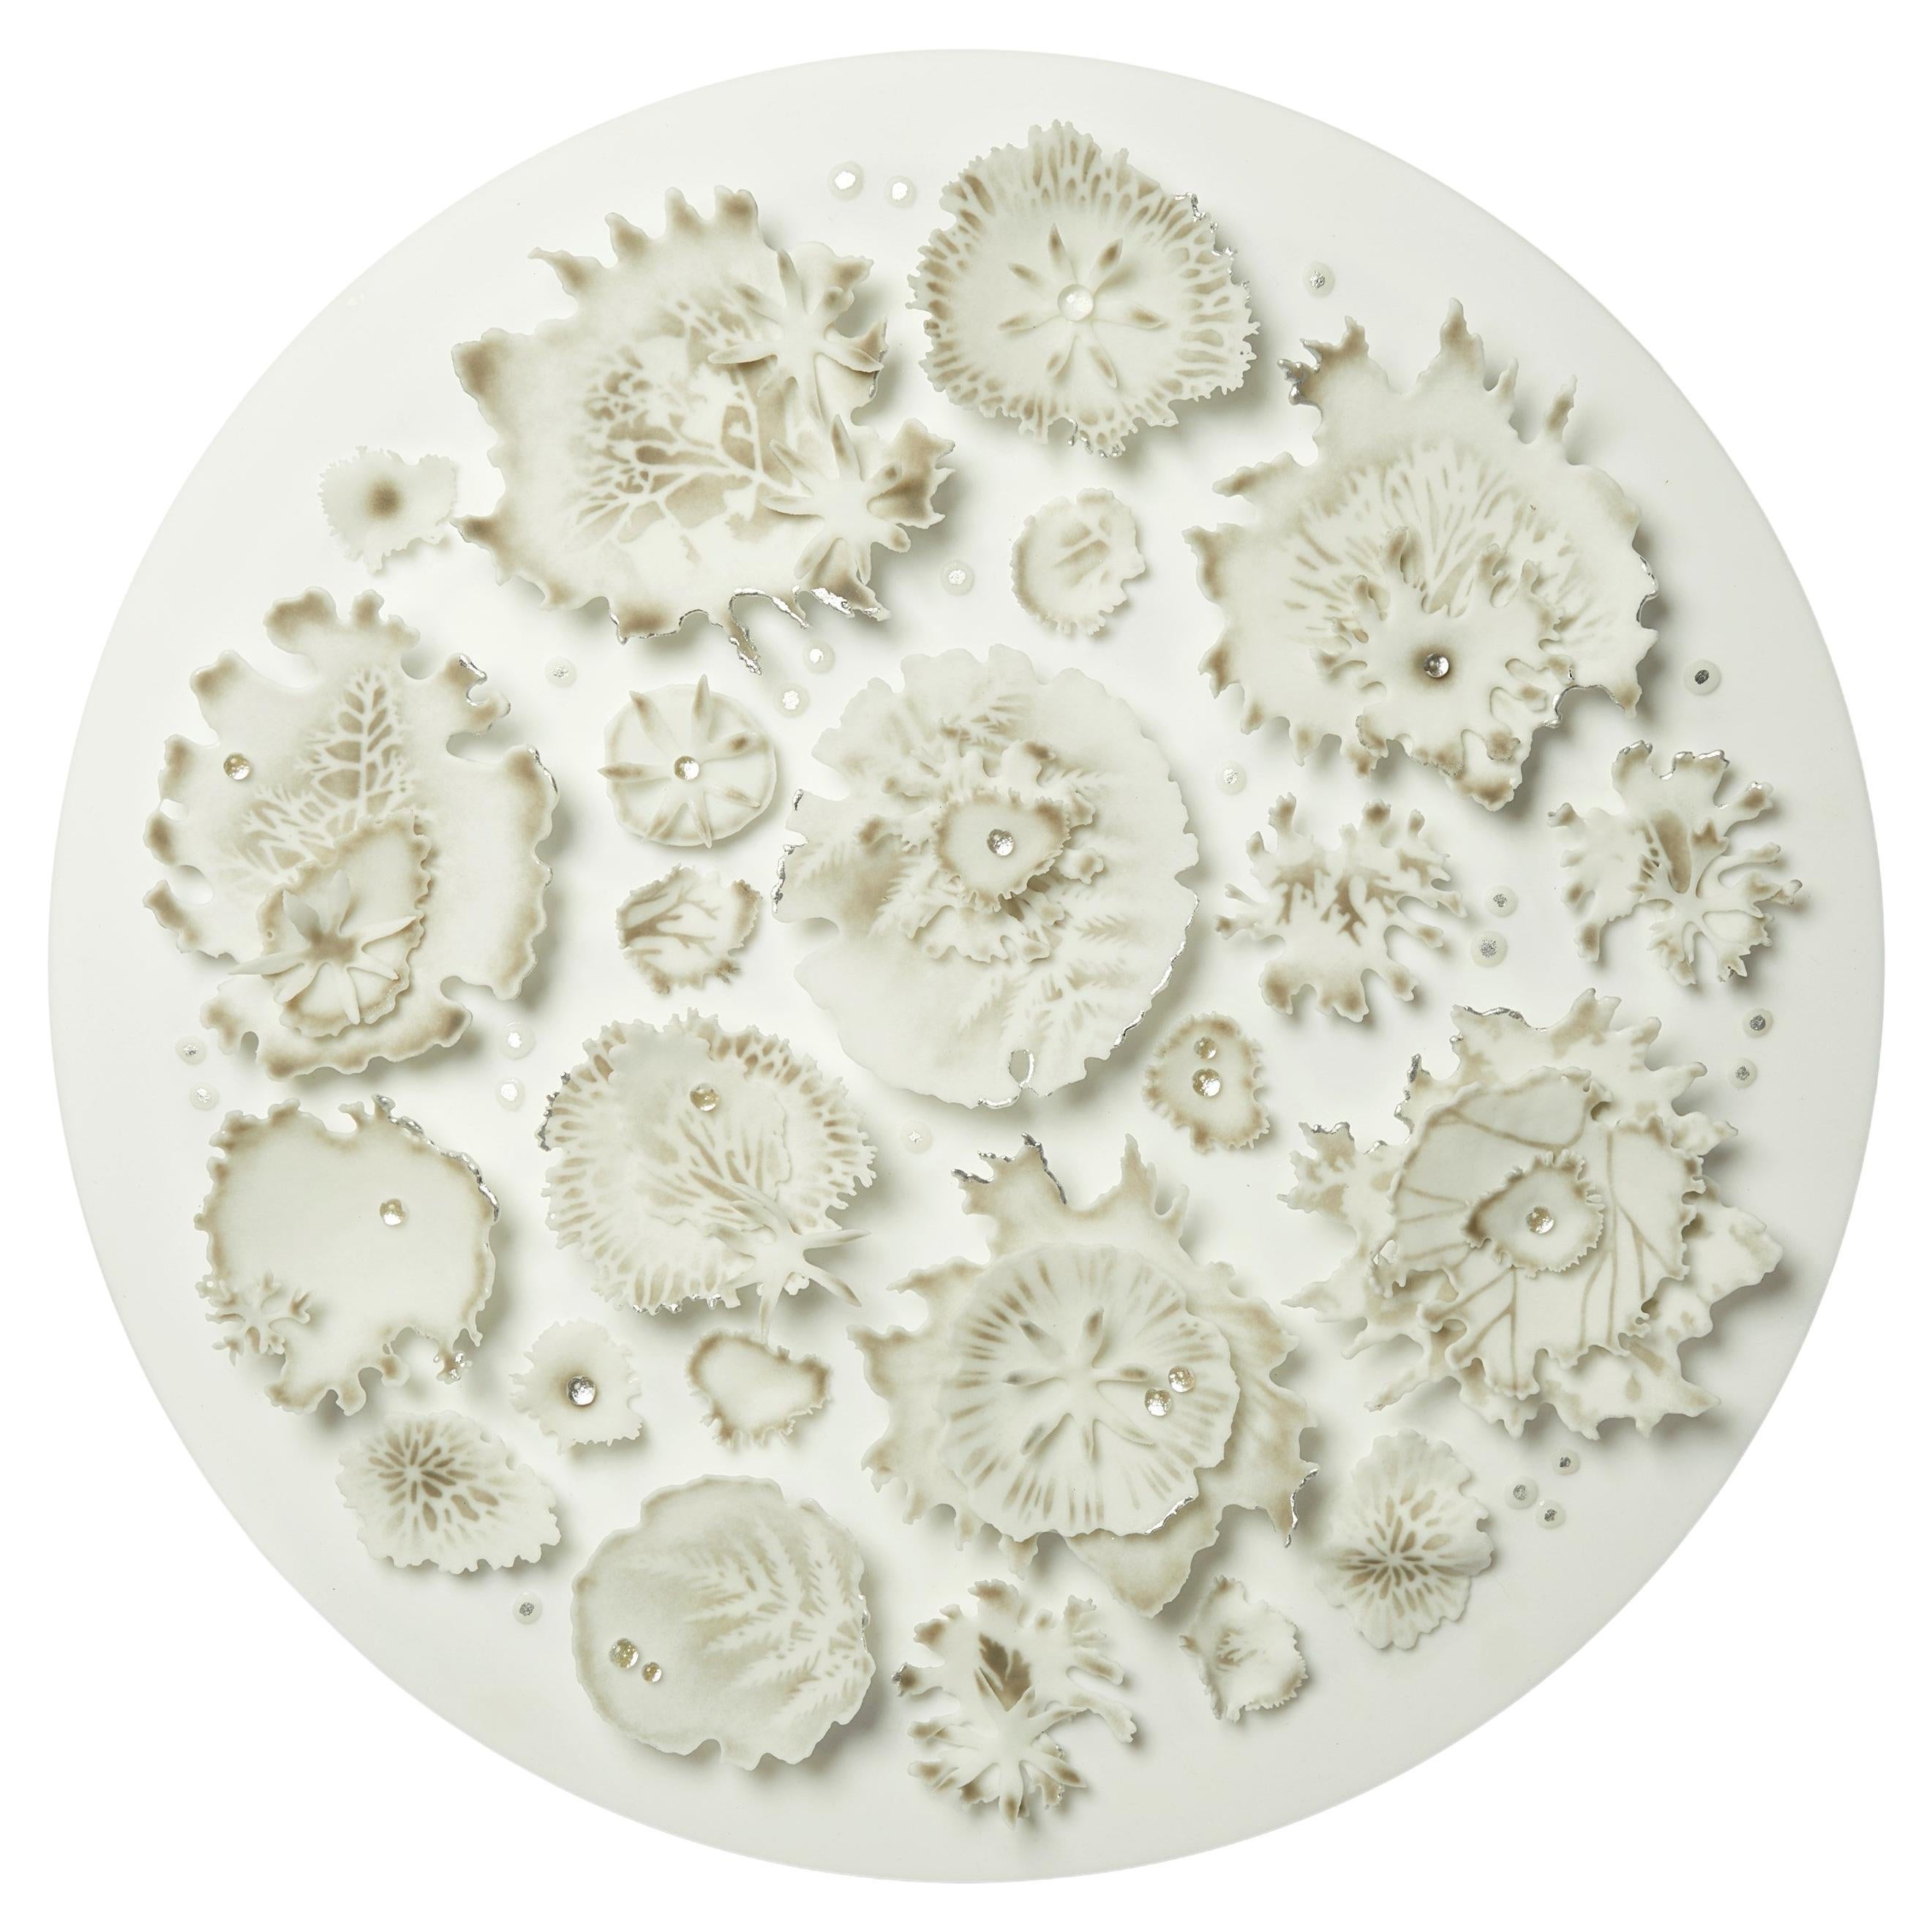 Dew, white round glass artwork with silver & bronze details by Verity Pulford For Sale